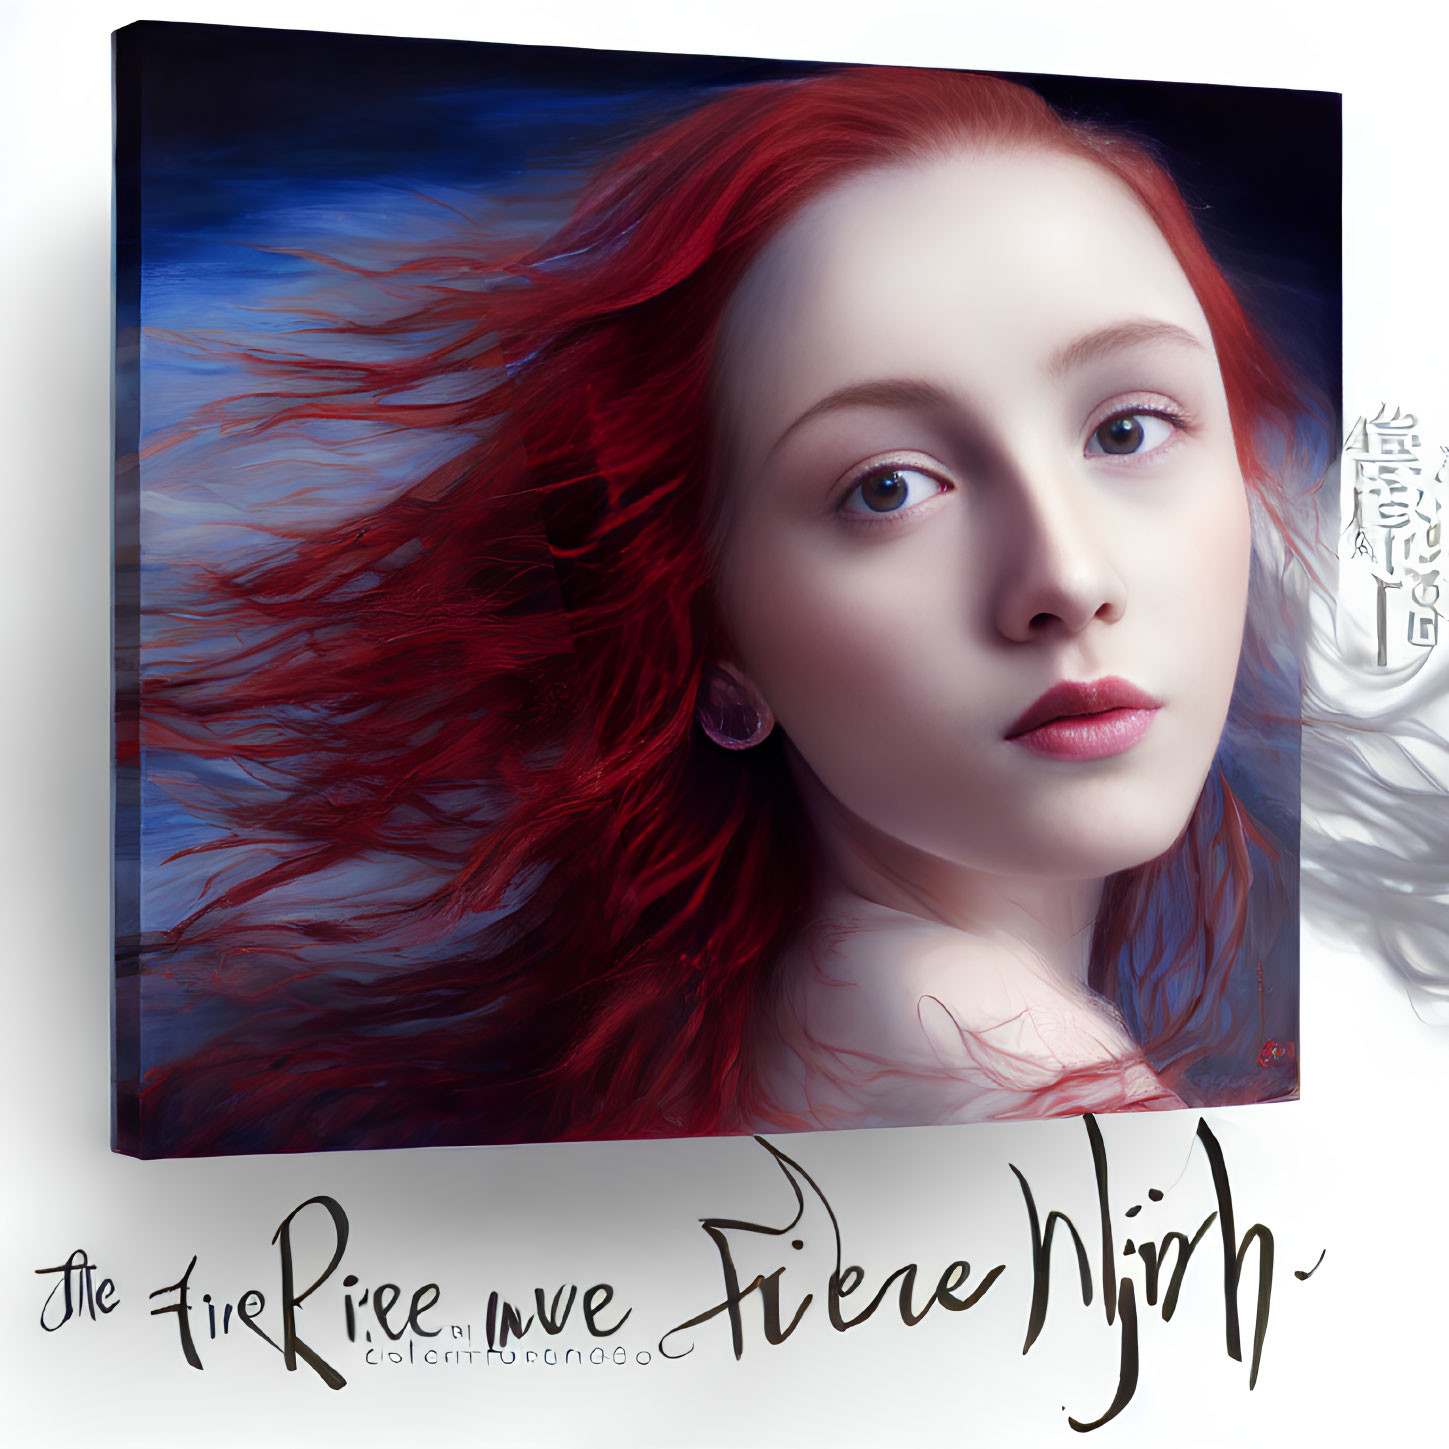 Digital painting of woman with red hair & fair skin on canvas, showcasing "Fire Within - Fierce